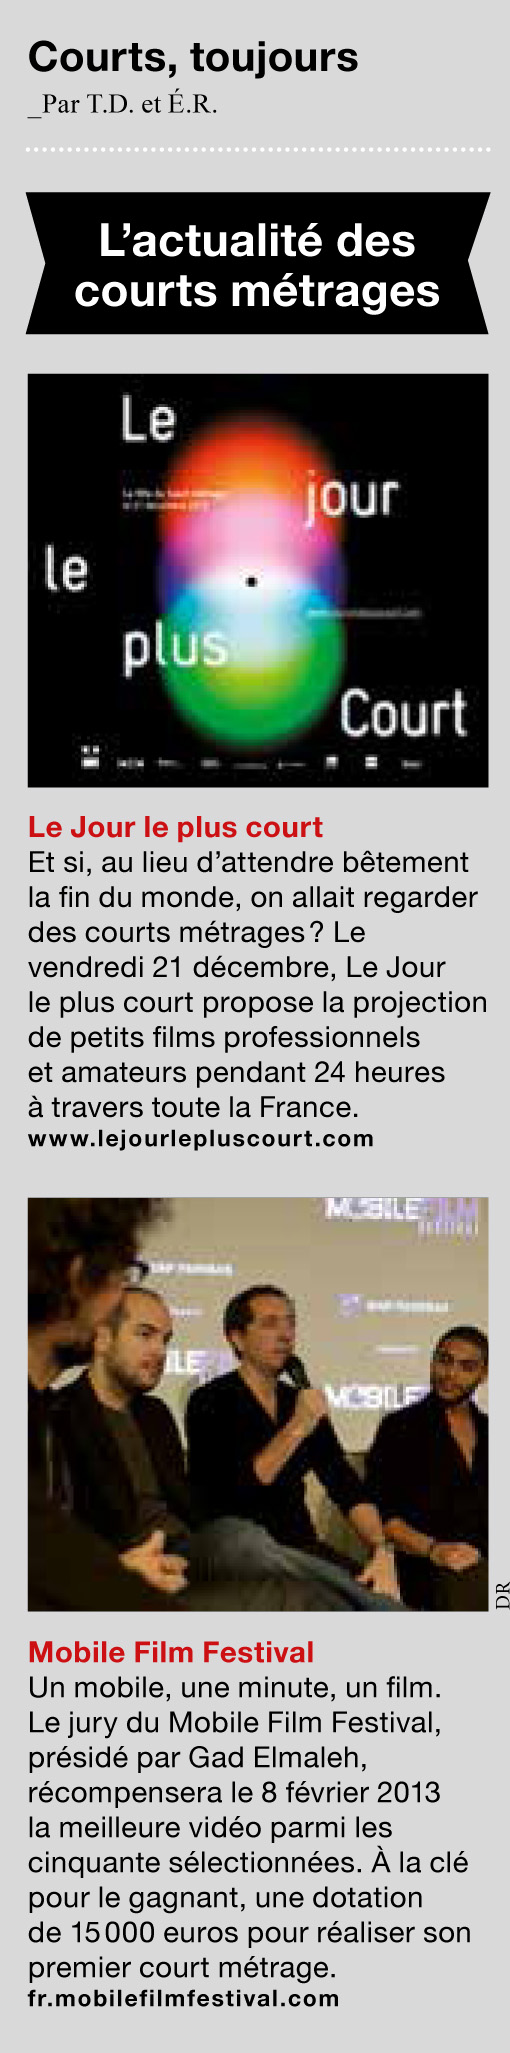 Courts toujours